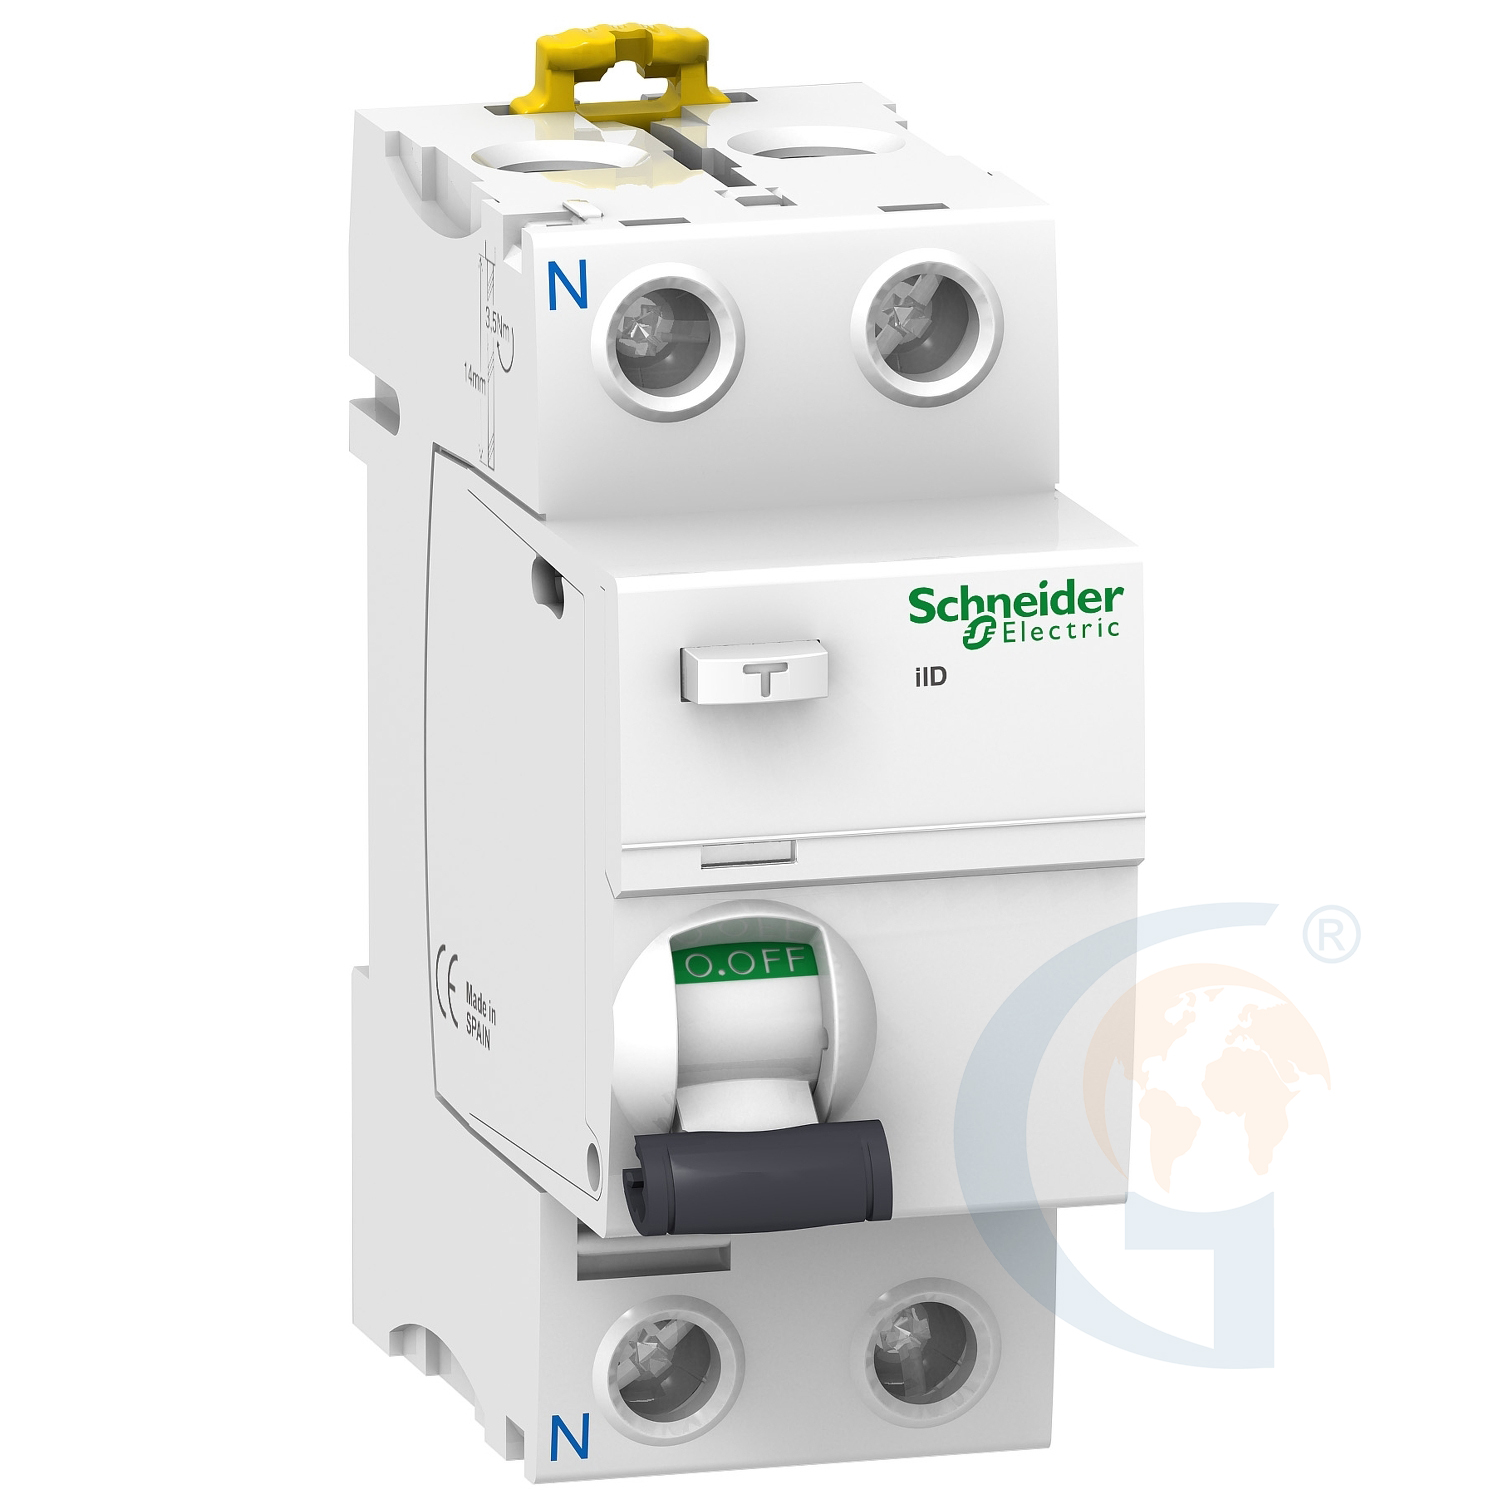 Schneider Electric A9R21291 ACTI 9 IID – RCCB – 2P – 100A – 30MA – TYPE A https://gesrepair.com/wp-content/uploads/2020/Schneider/Schneider_Electric_A9R21291_.jpg